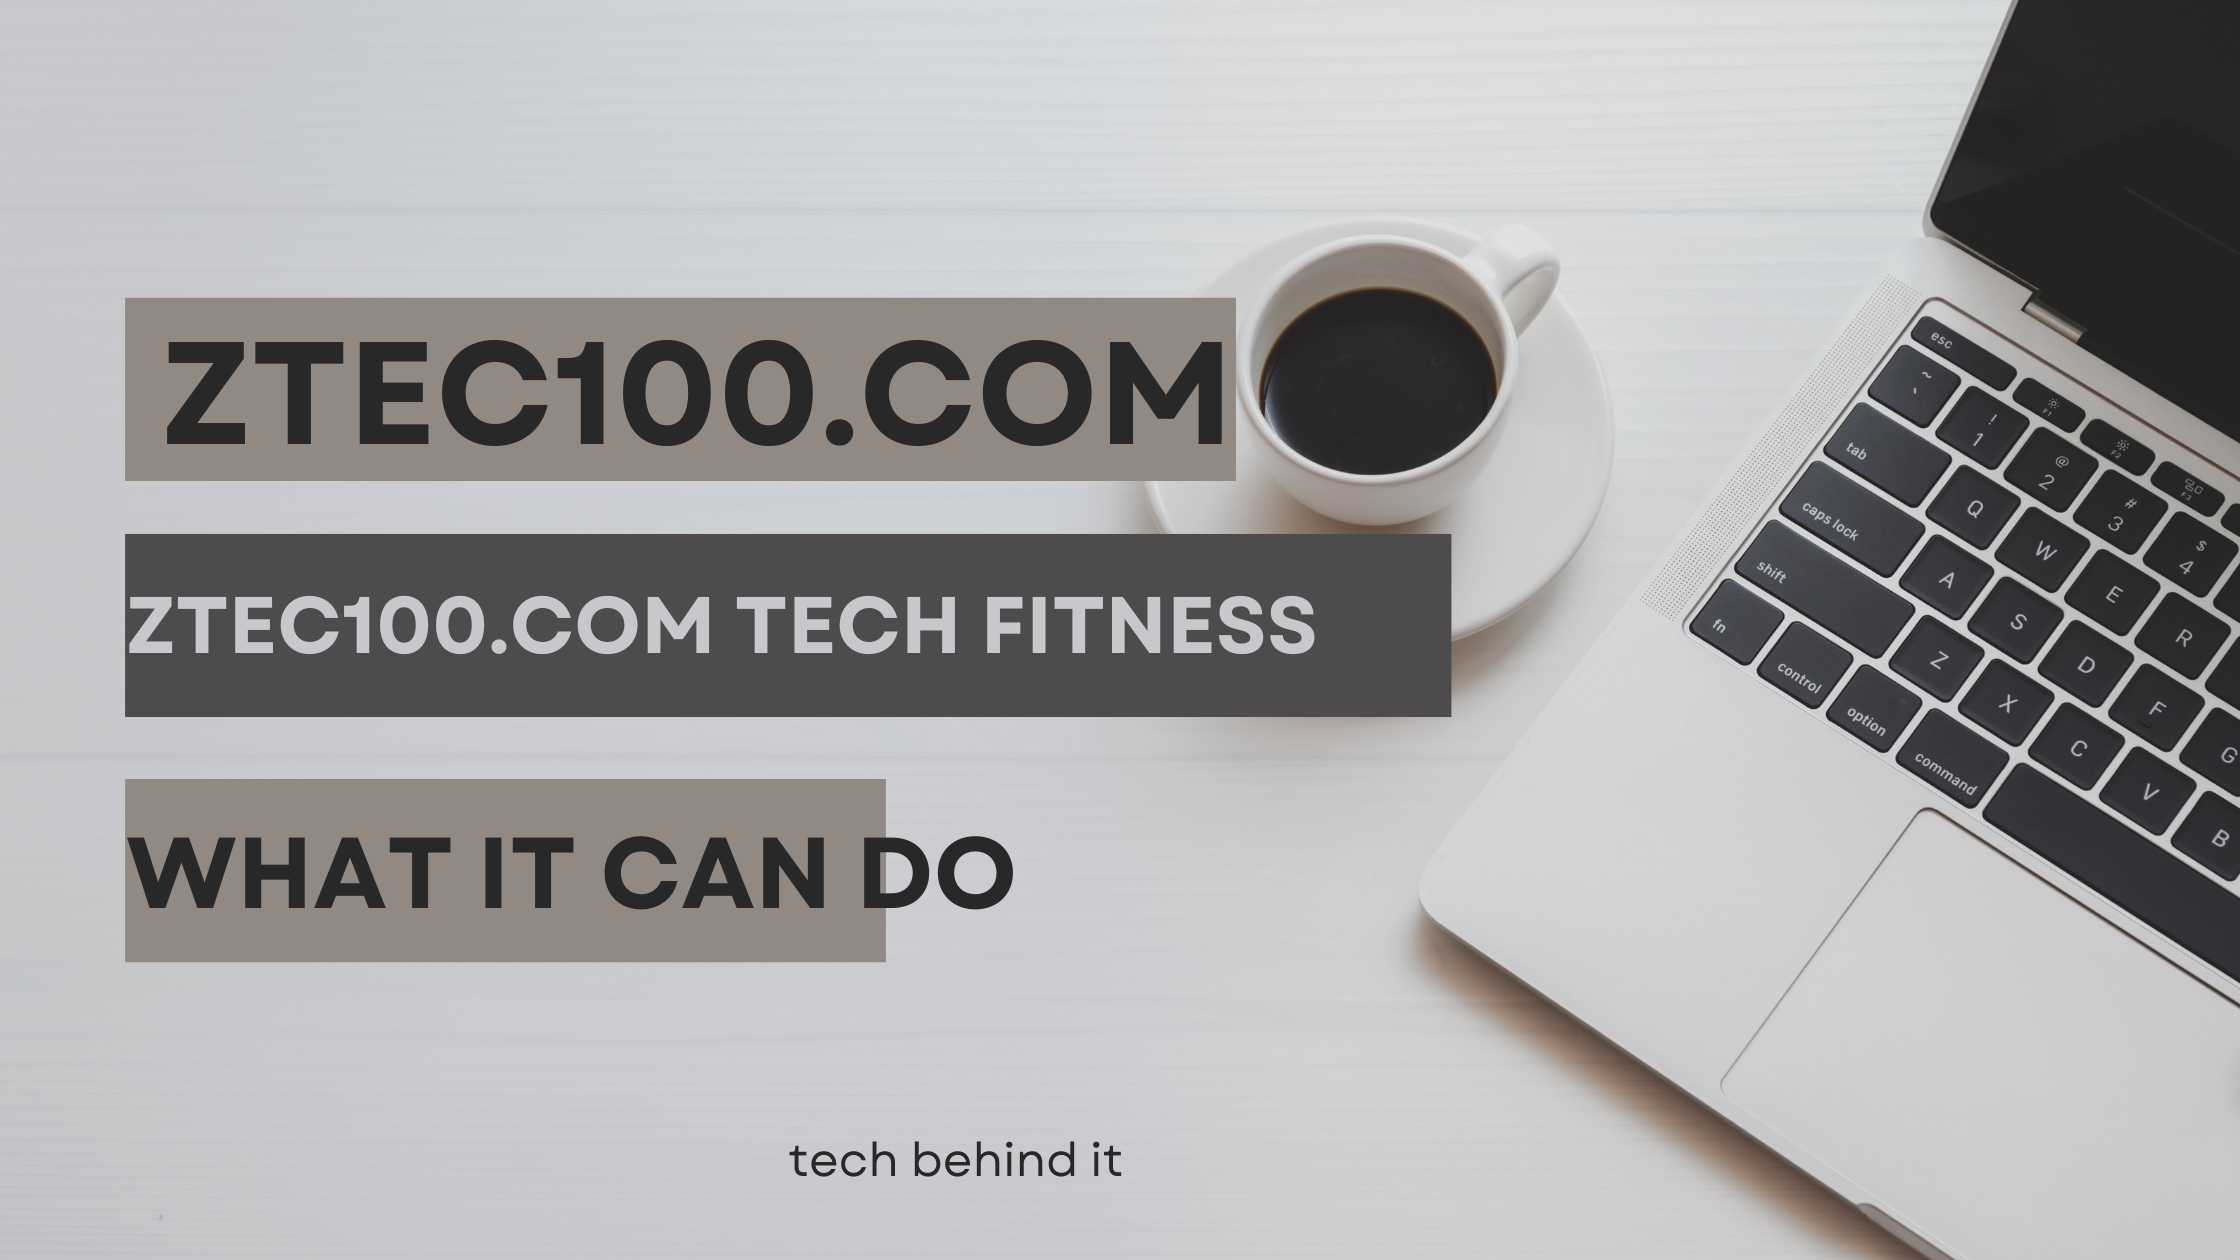 A Quick Look at the Ztec100.com Tech Fitness and What It Can Do: